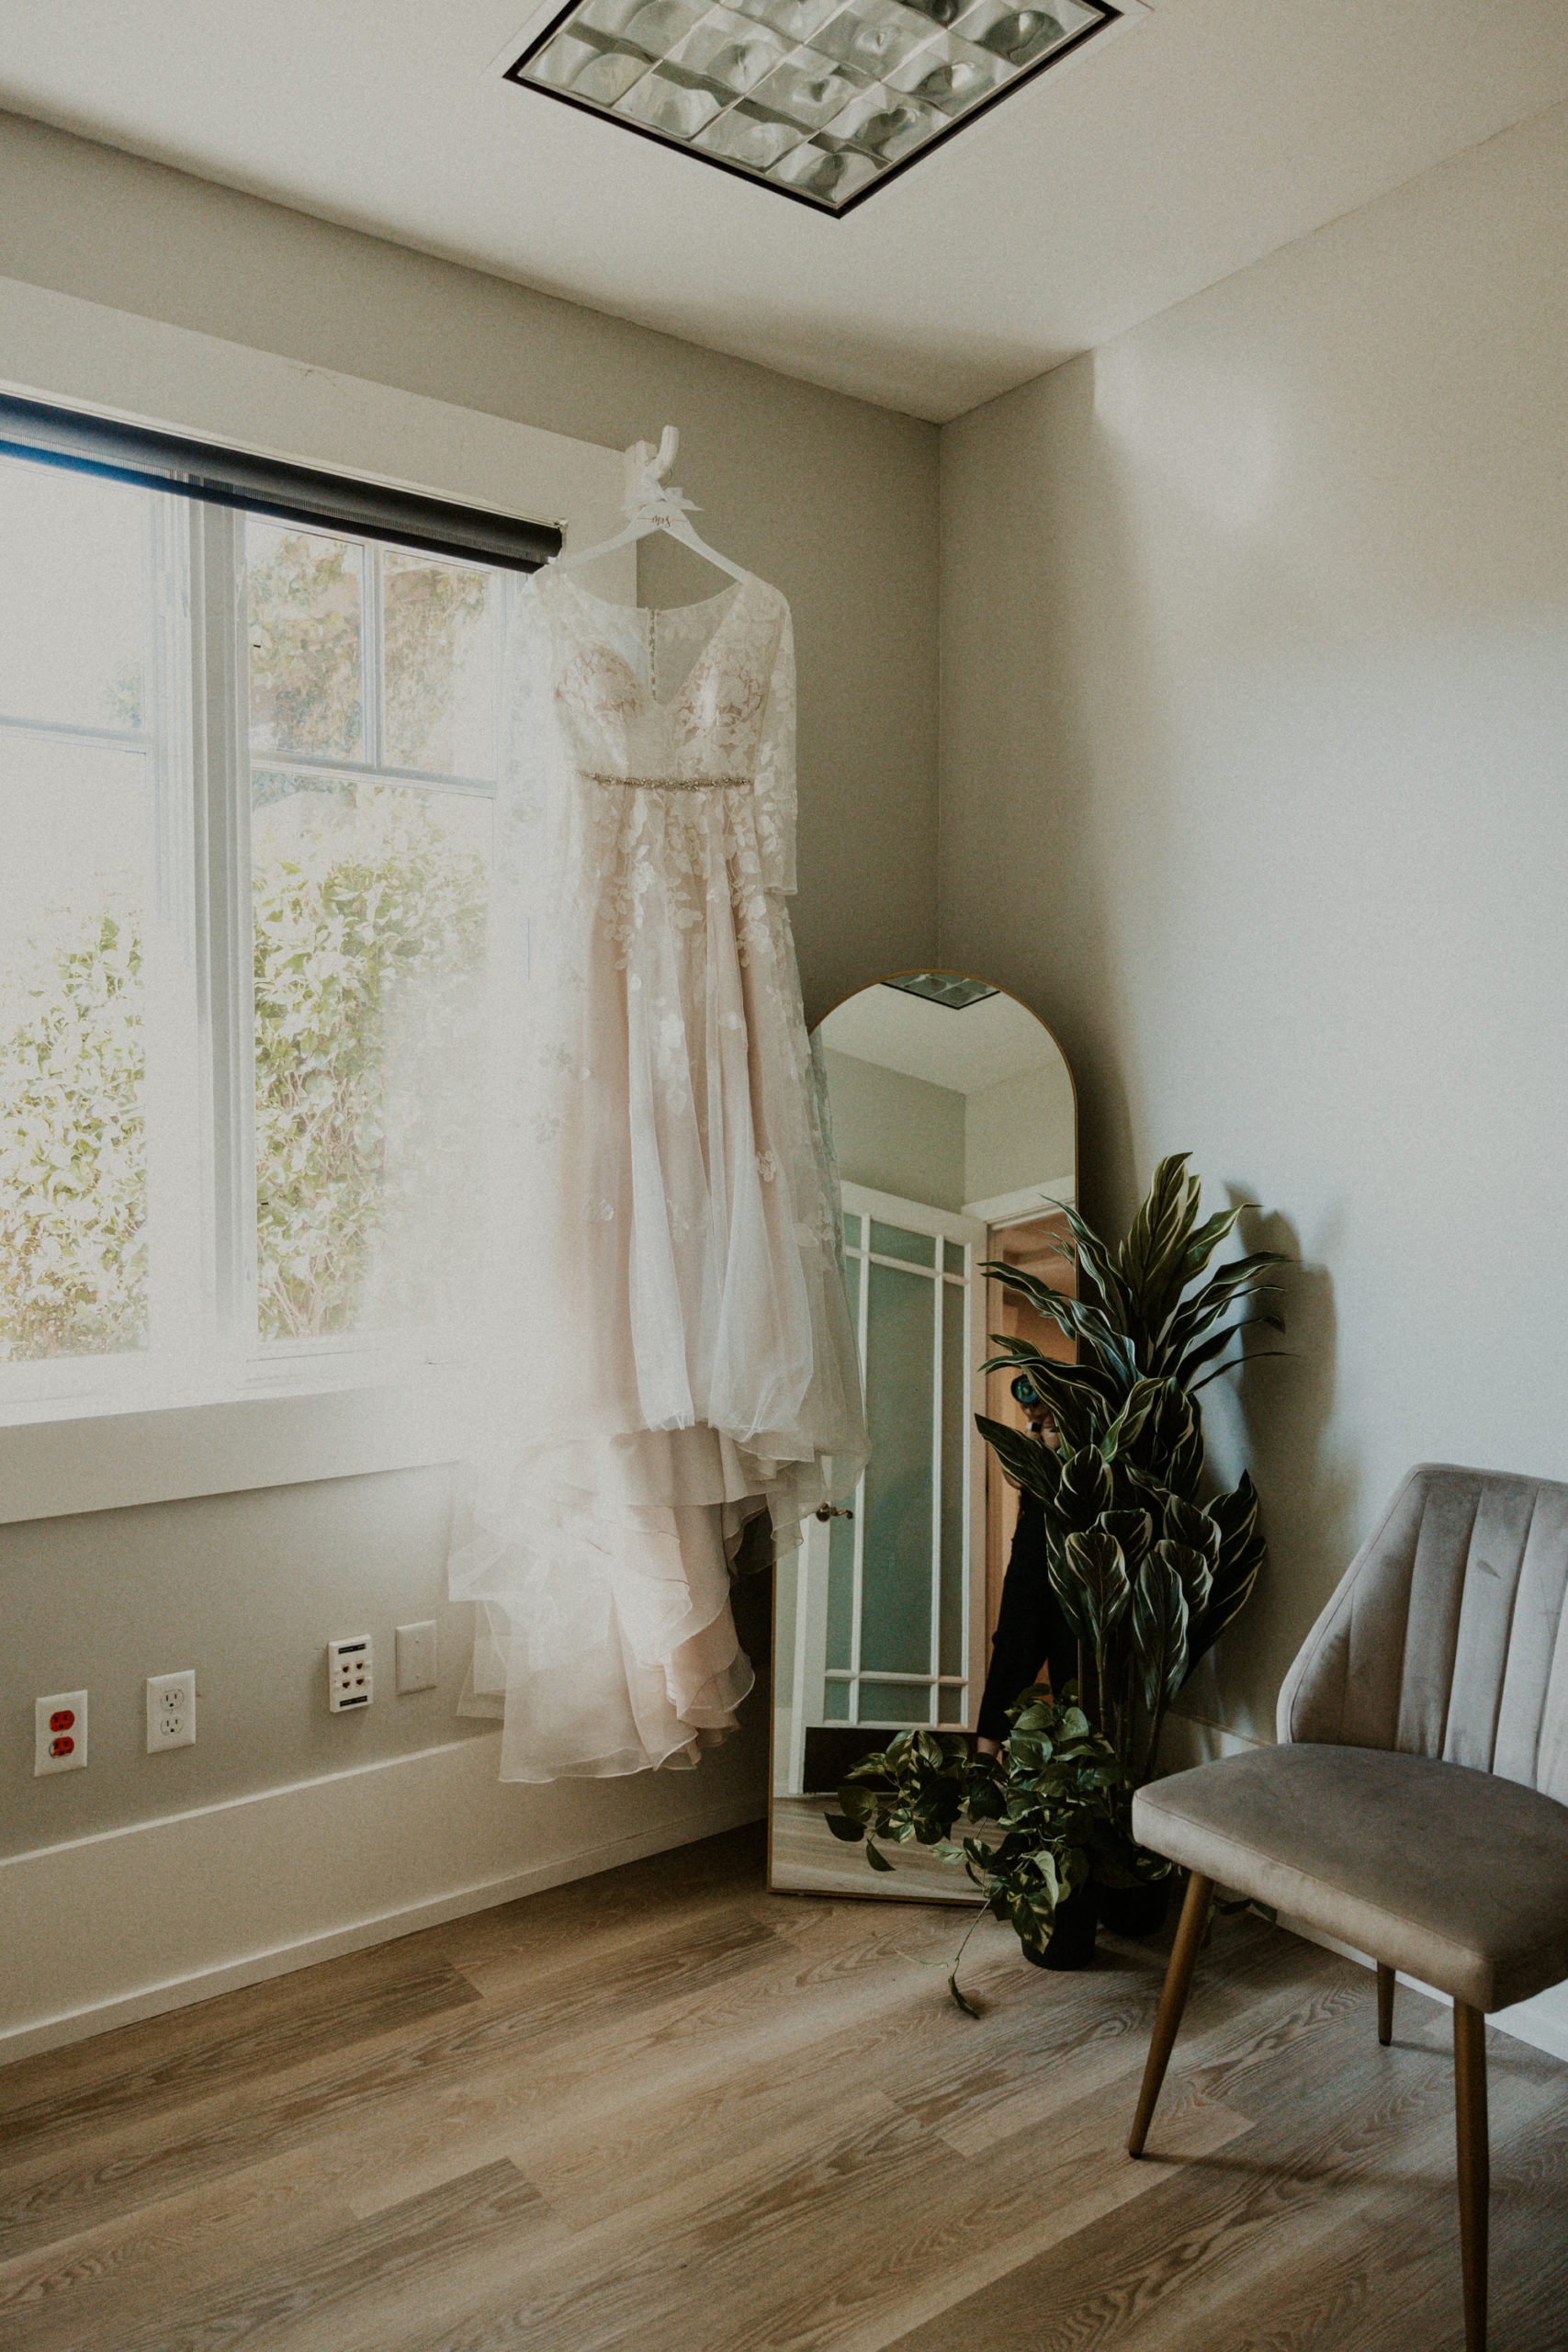 How to pick out the perfect wedding dress for an elopement